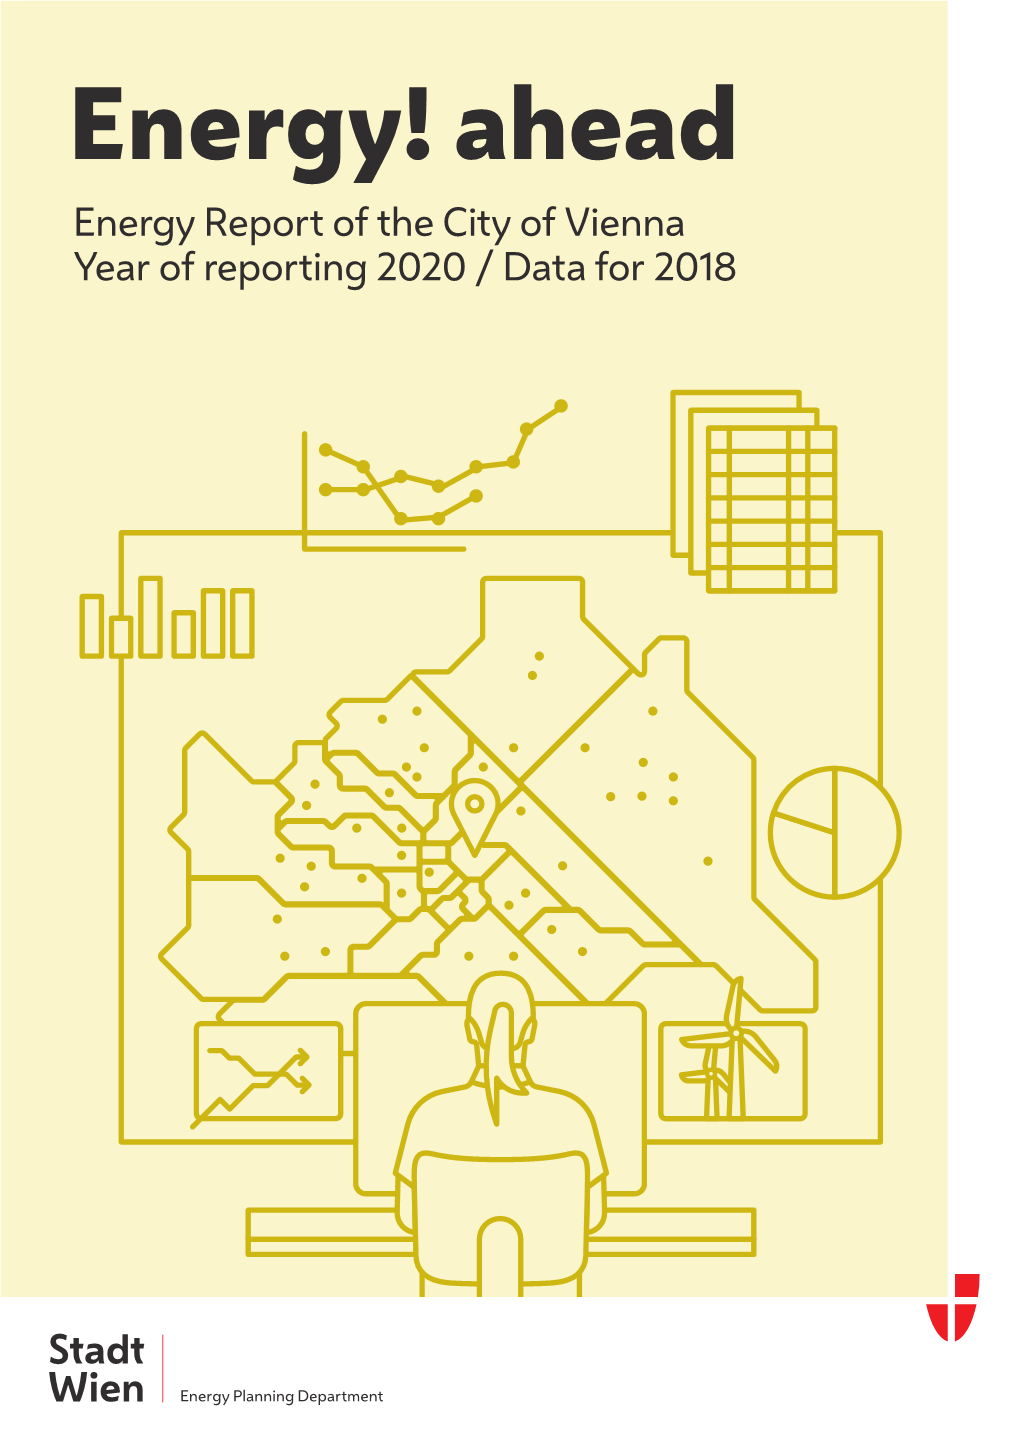 Ahead Energy Report of the City of Vienna Year of Reporting 2020 / Data for 2018